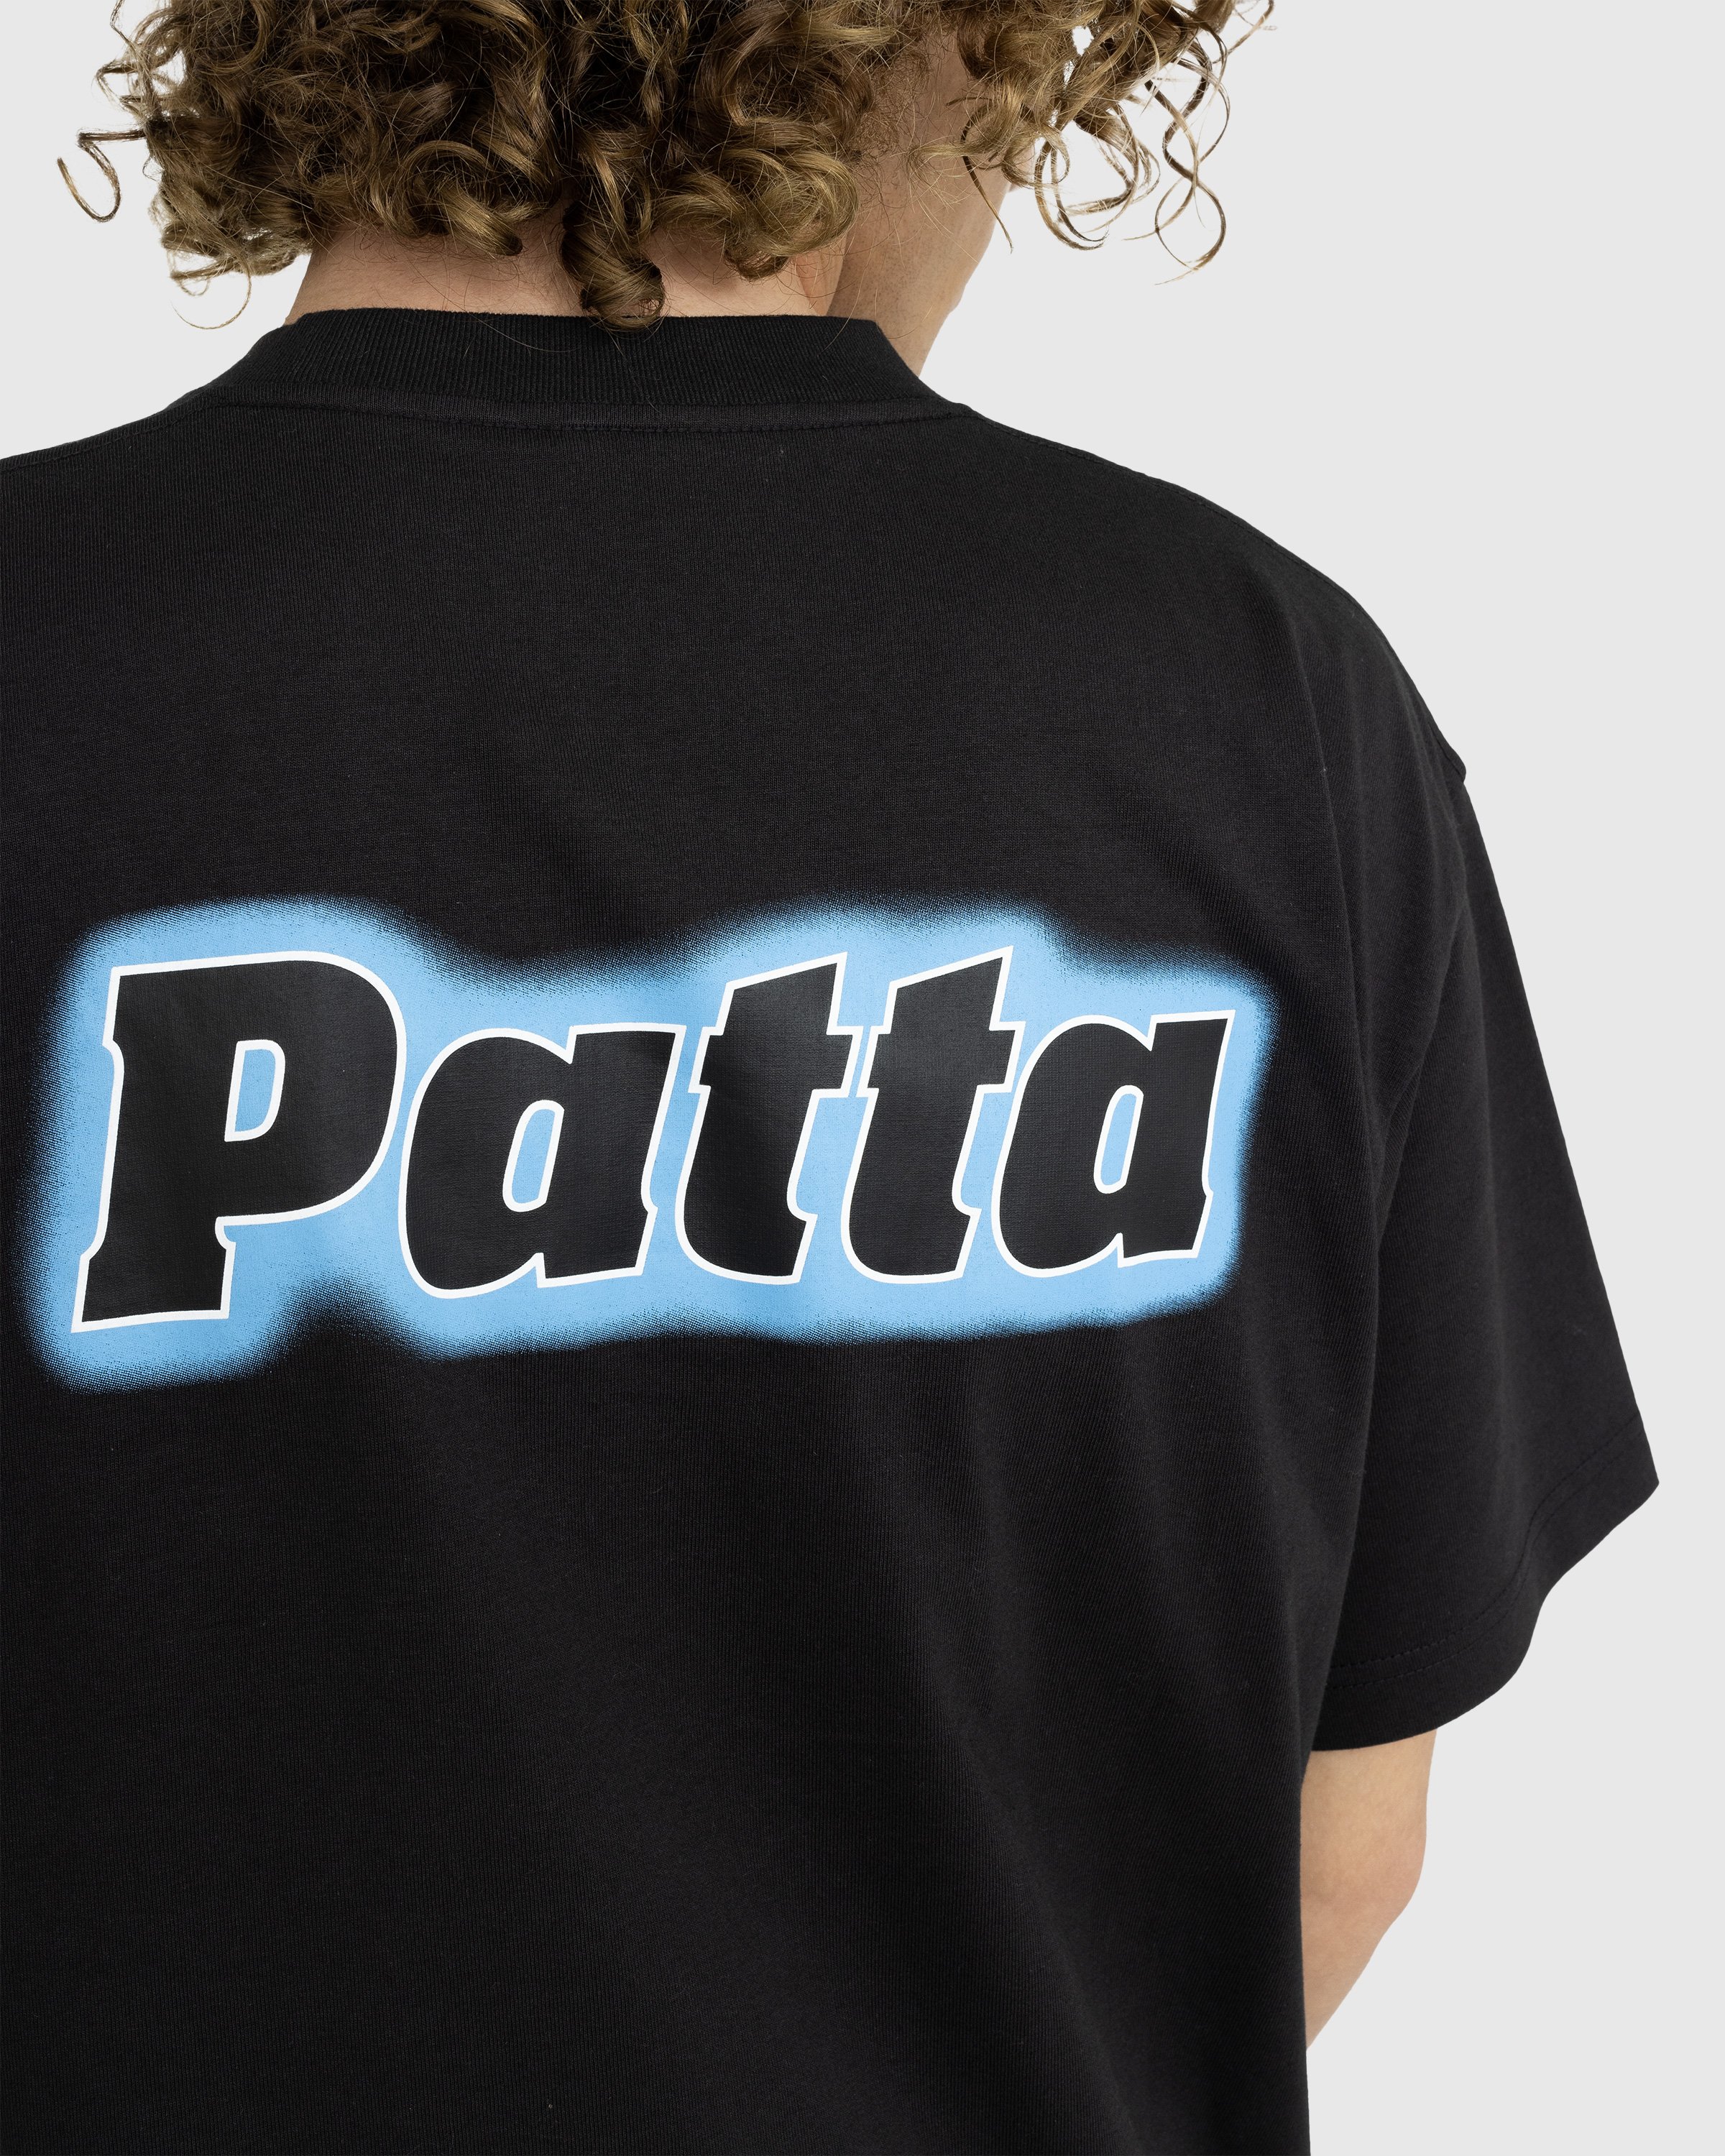 Patta - It Does Matter What You Think T-Shirt Black - Clothing - Black - Image 4